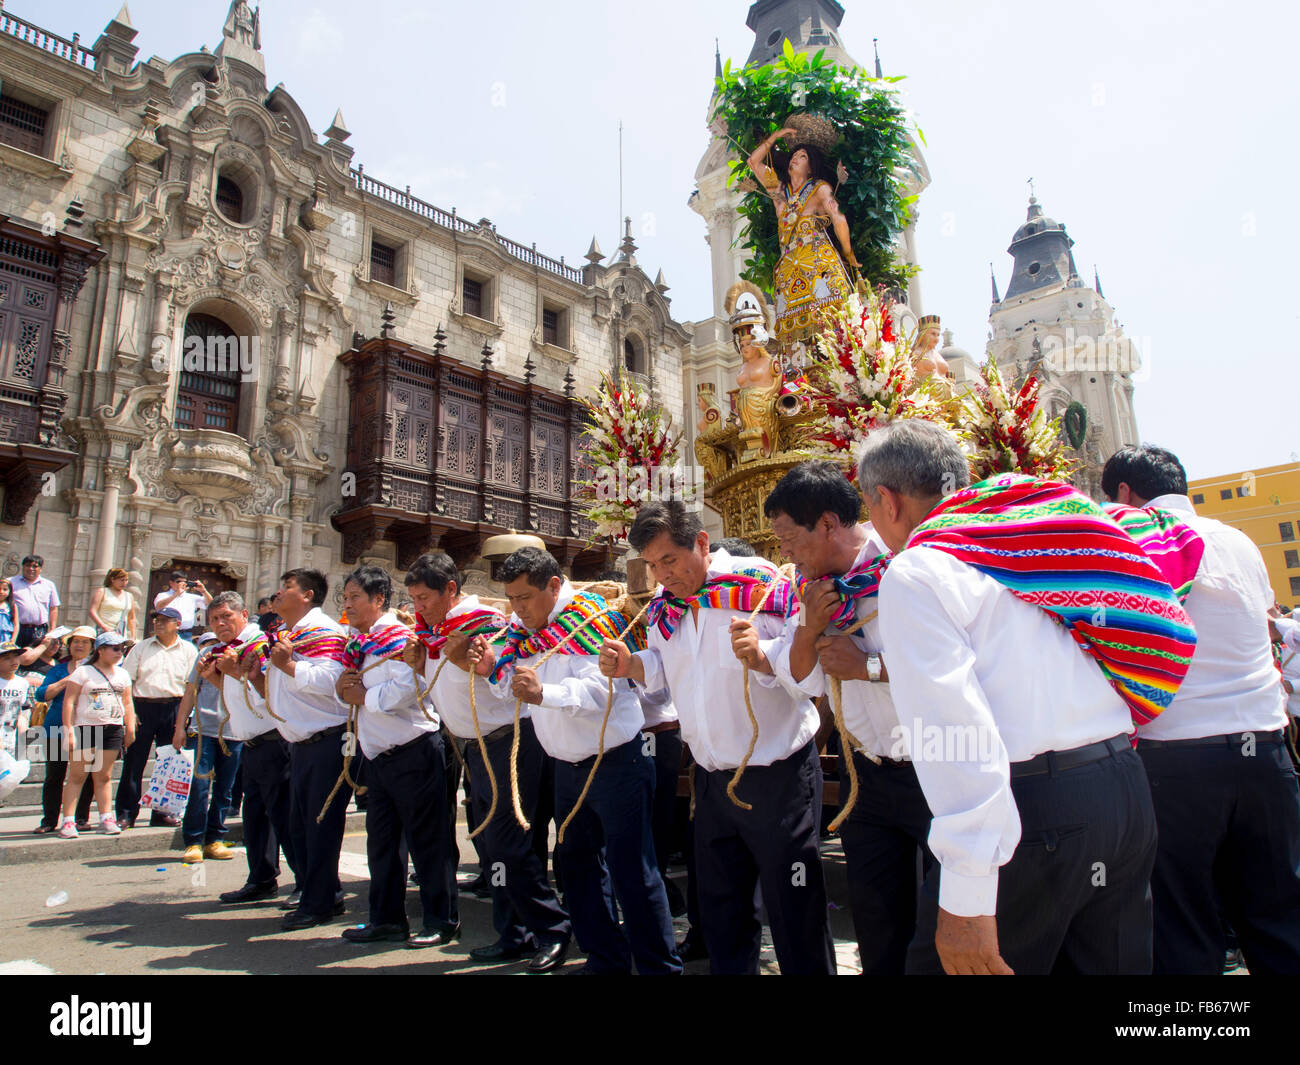 Lima, Peru. 10th January, 2016. Procession of religious images from Cuzco, in the main square of Lima, Peru Credit:  Carlos García Granthon/Alamy Live News Stock Photo